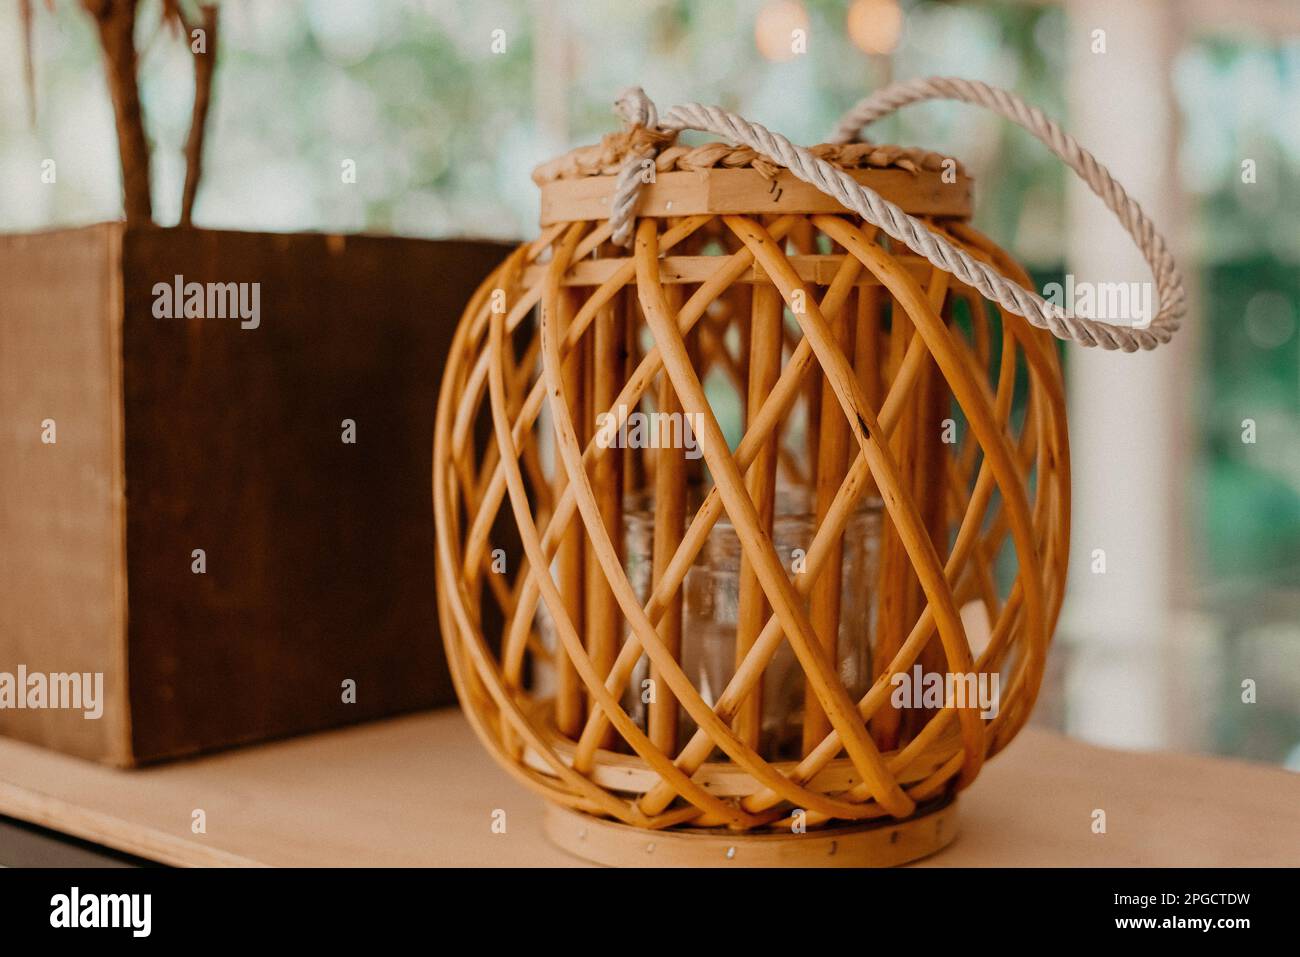 A decorative braided wicker basket with a rope handle, interior